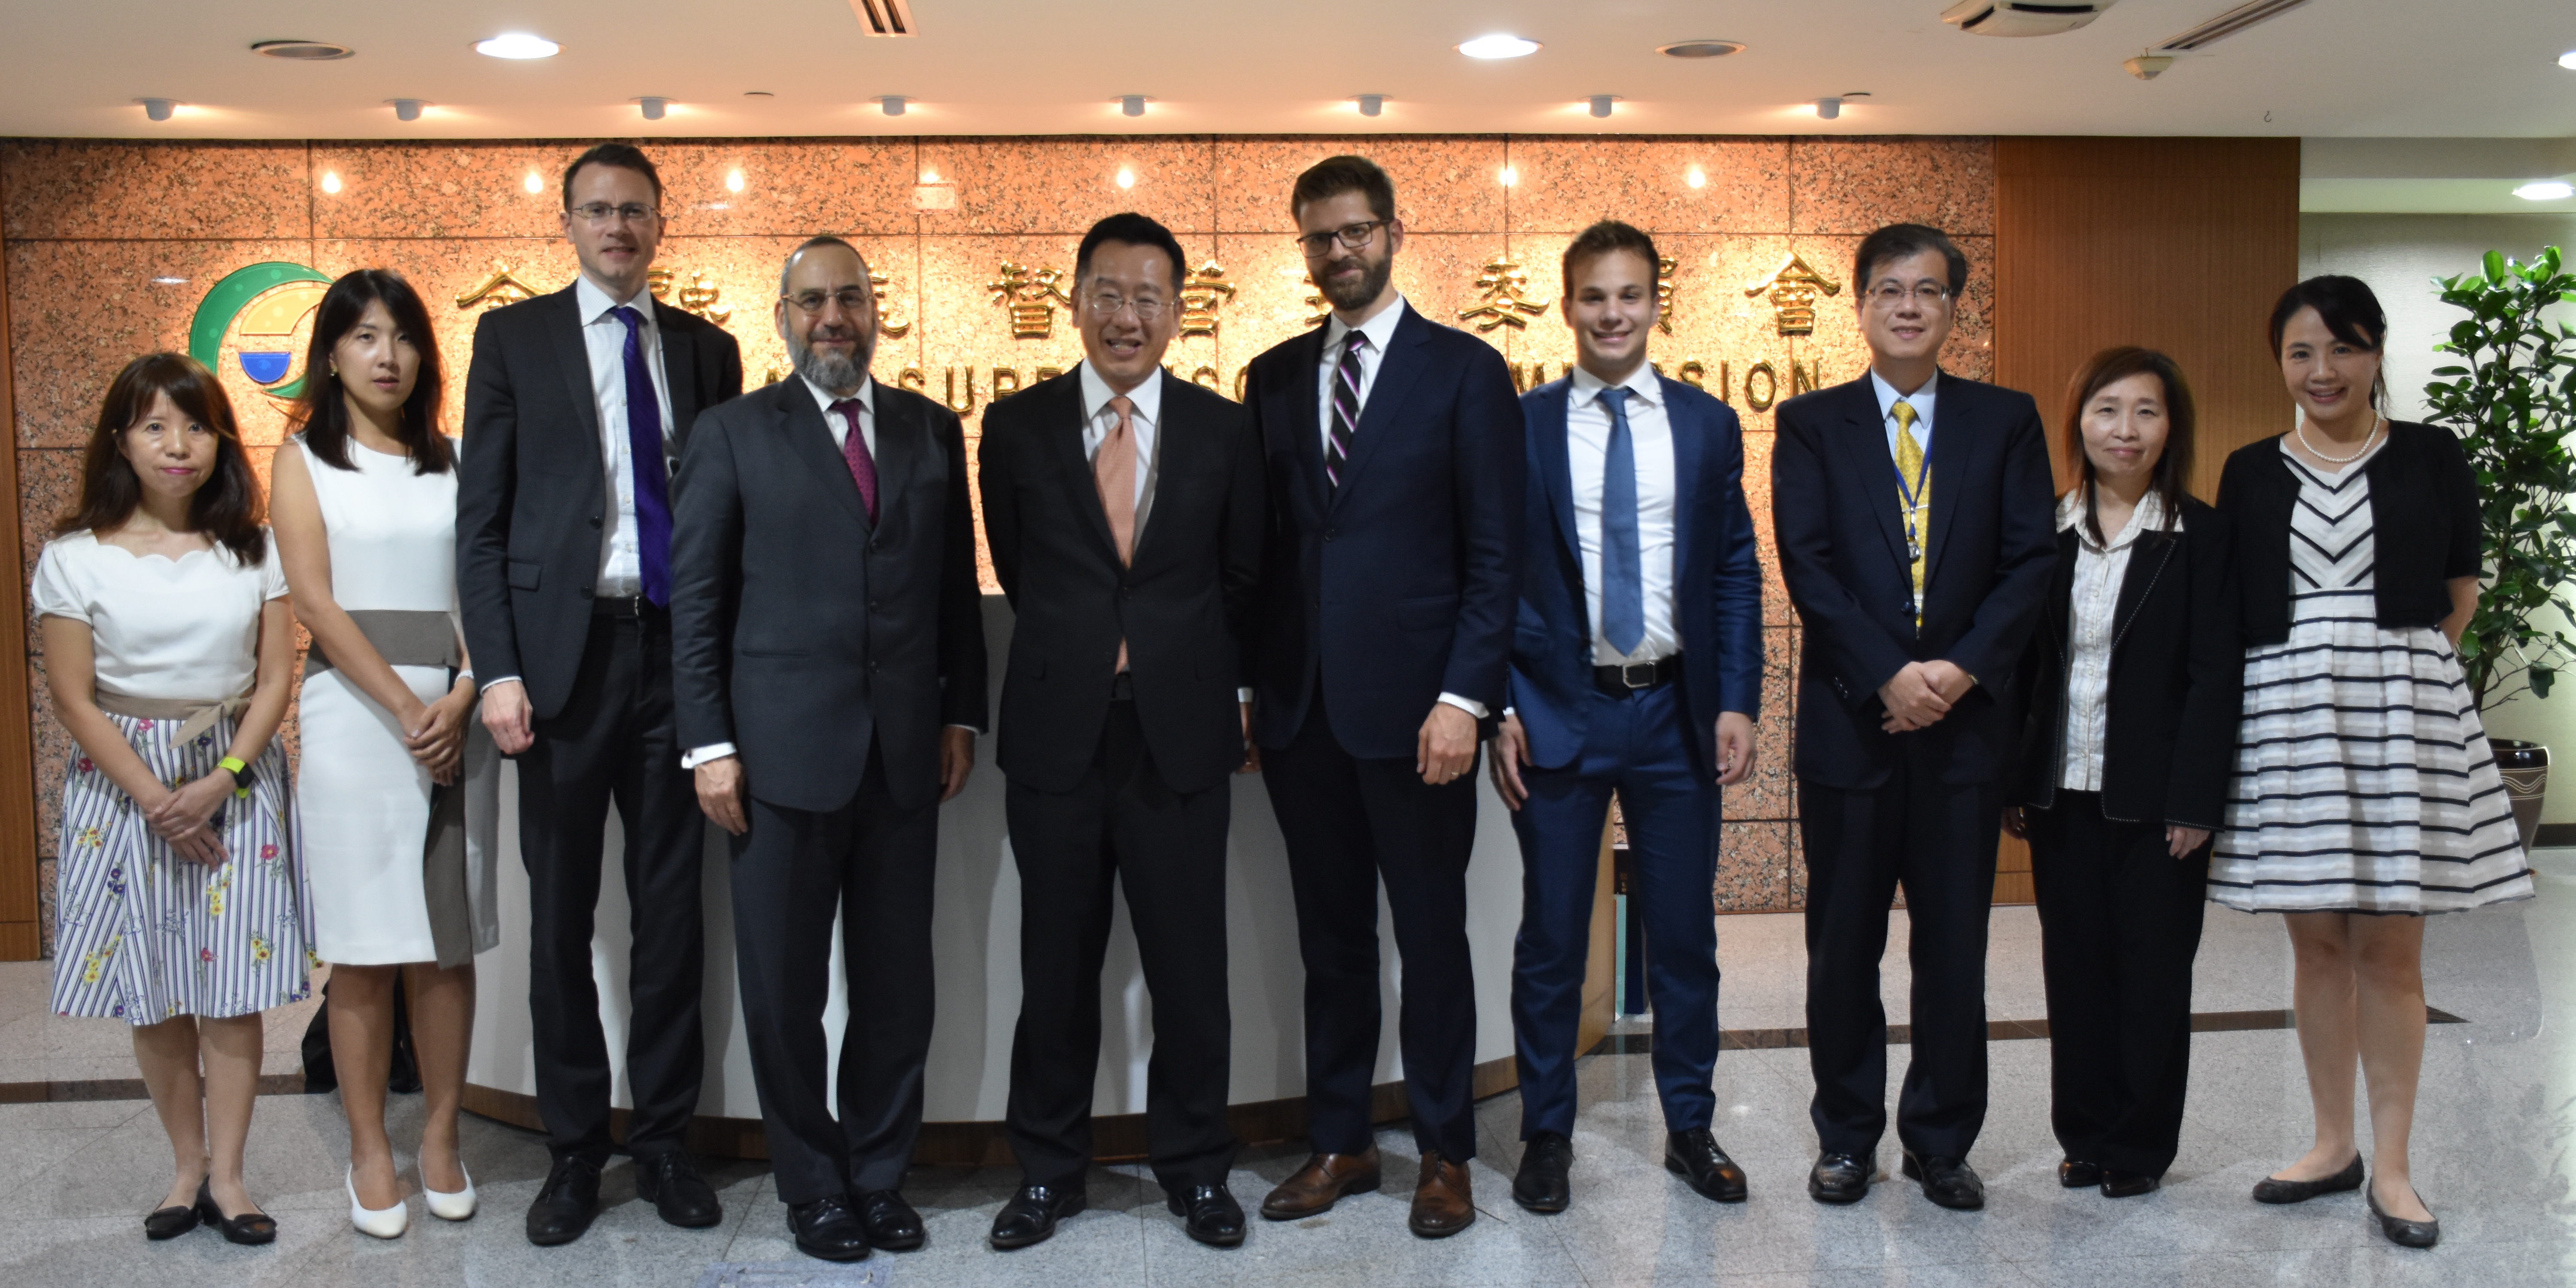 Mr. Mitchell A. Silk (the 4th from left), Acting Assistant Secretary of the U.S. Treasury, was warmly received by former Chairman Koo on July 18th, 2019. The two sides broadly exchanged views on economic and financial issues of mutual interests.